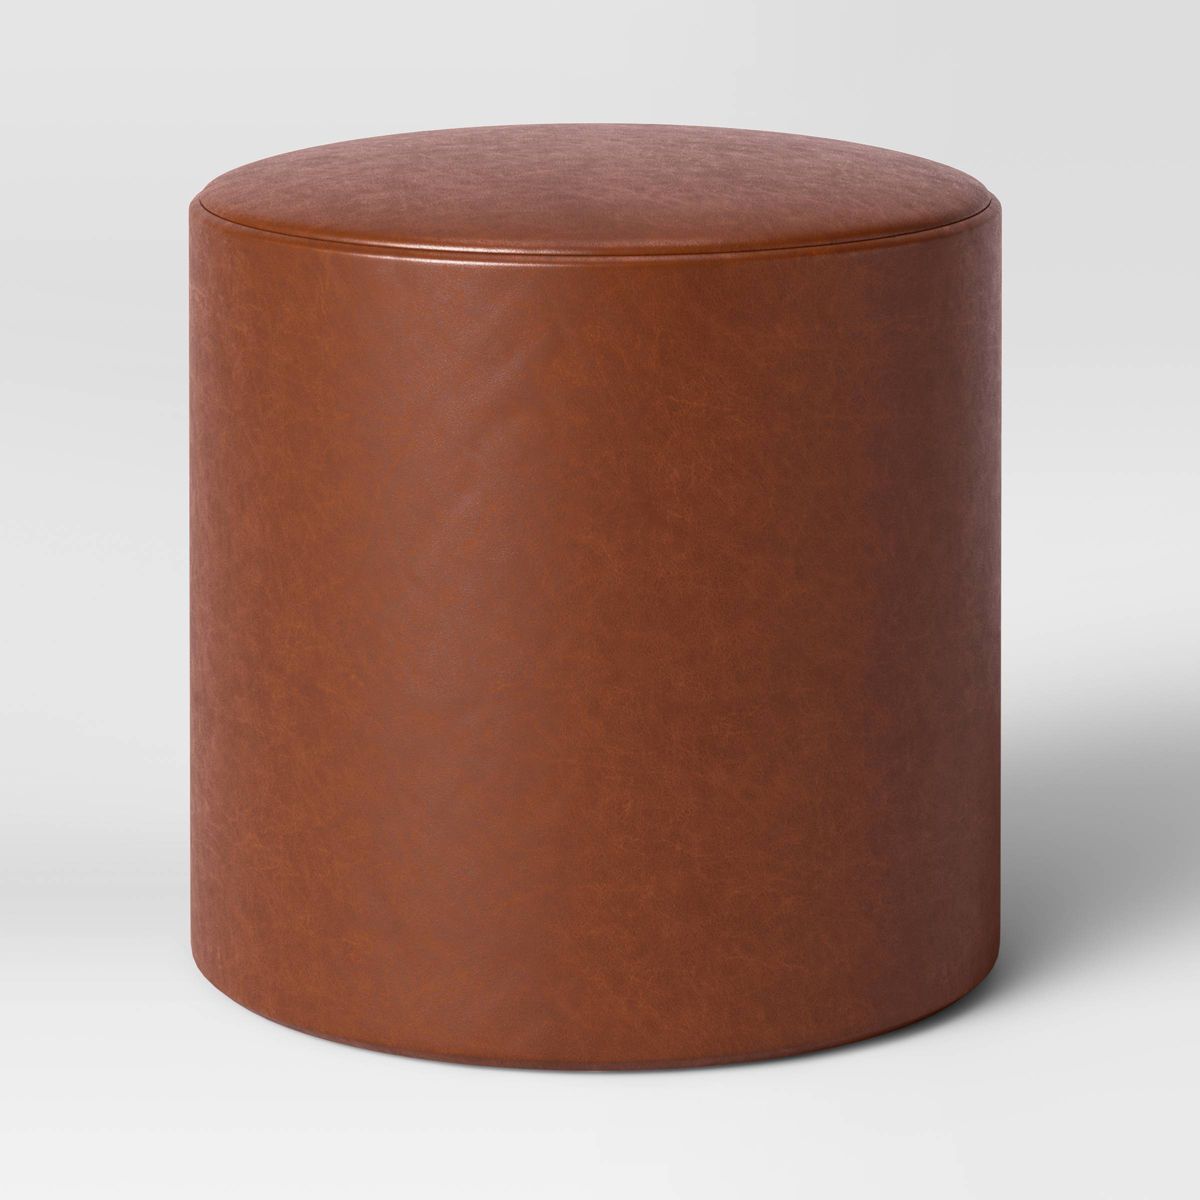 Bodrum Round upholstered ottoman - Threshold, Brown, Leather